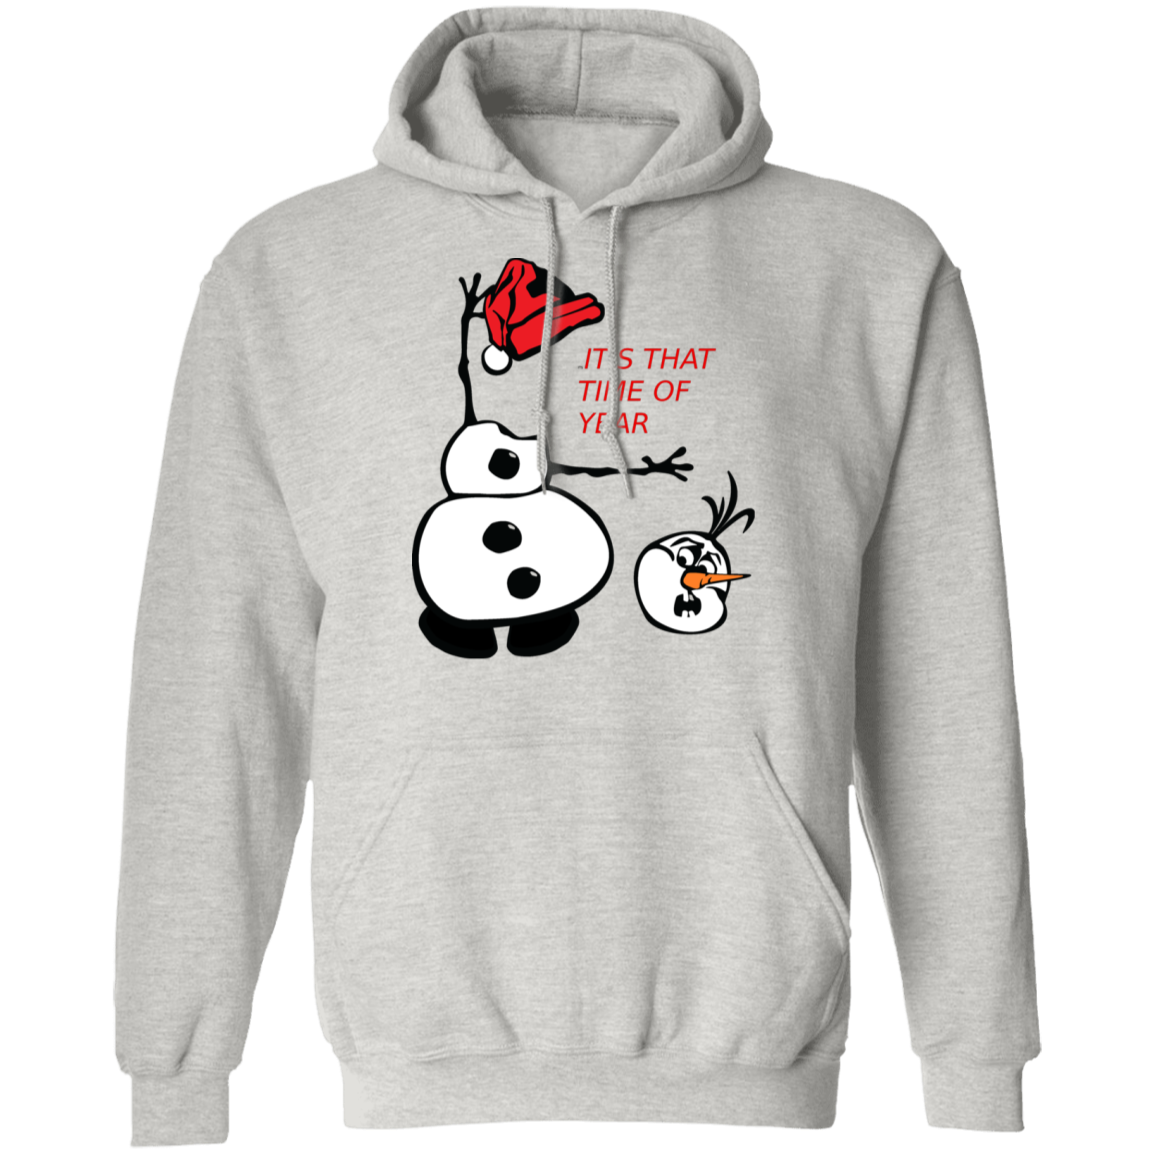 That time of year Pullover Hoodie